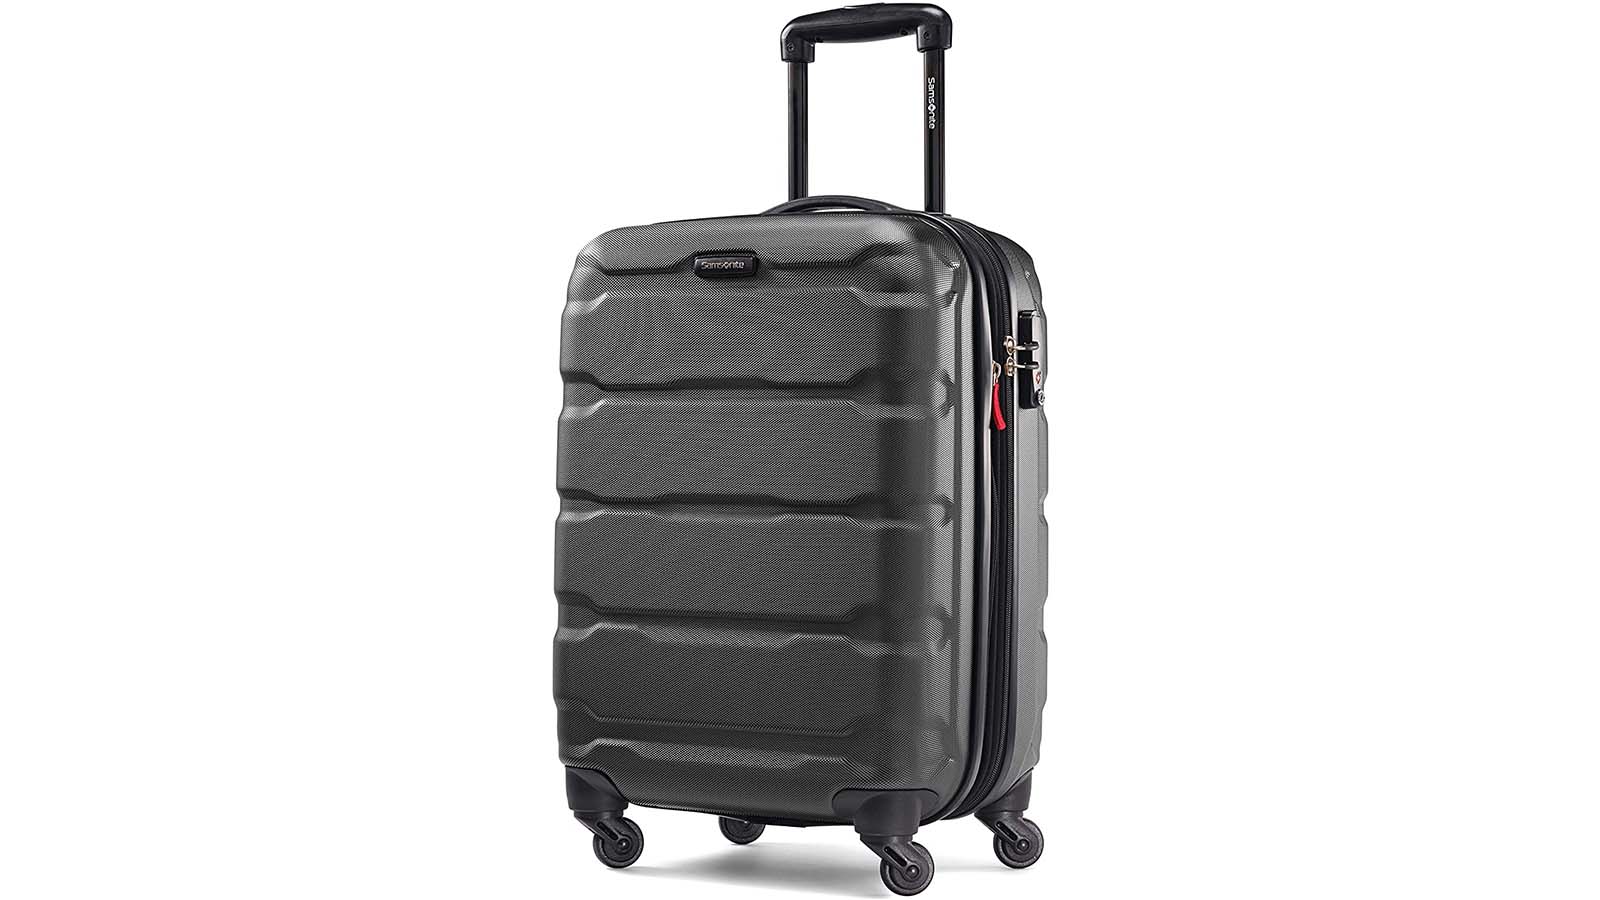 Hanke 20 Inch Carry On Luggage Airline Approved, Lightweight PC Hardside  Suitcase with Spinner Wheels & TSA Lock,Rolling luggage bags for